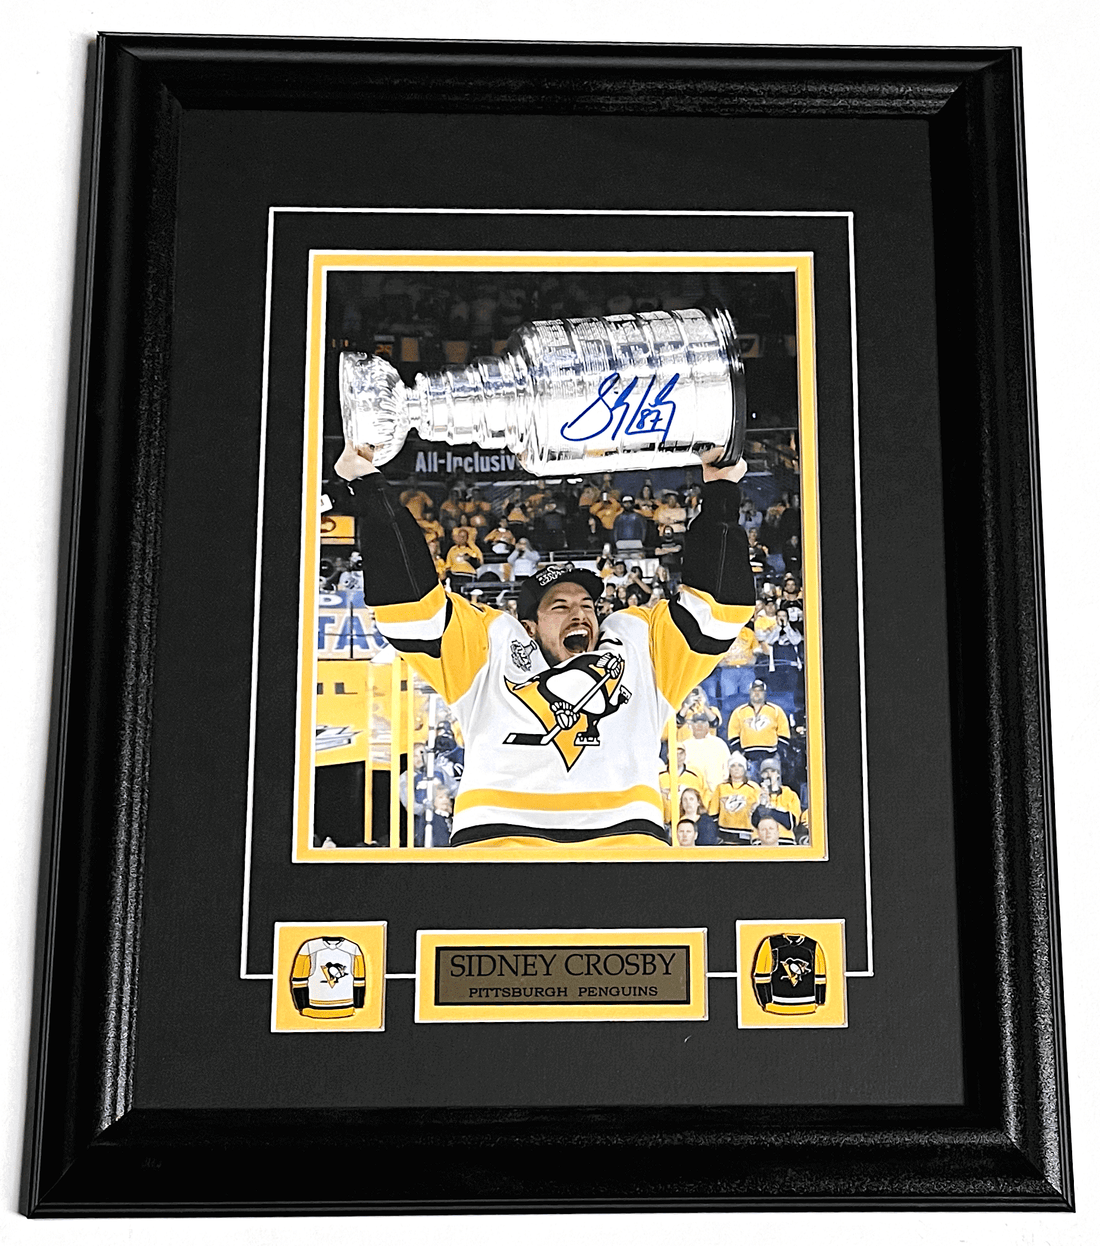 Sidney Crosby Autograph Pittsburgh Penguins Framed Hockey Memorabilia. Accompanied with a Certificate of Authenticity.